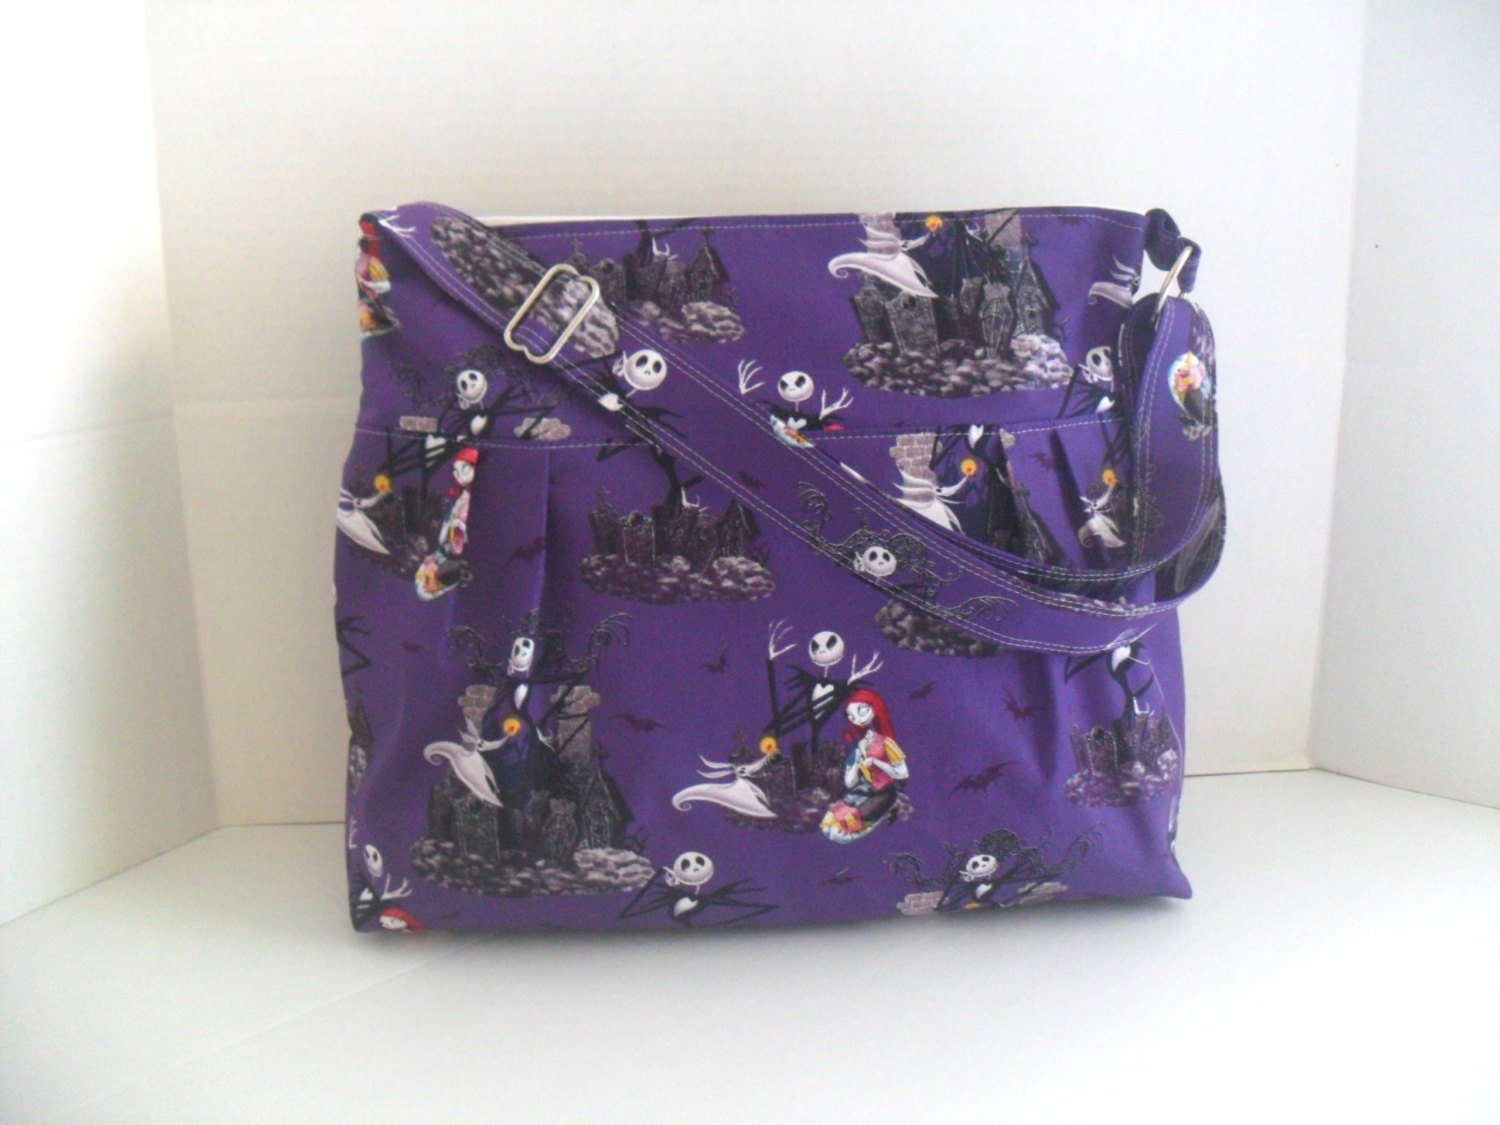 SALE Nightmare Before Christmas Diaper Bag Diaper by fromnancy